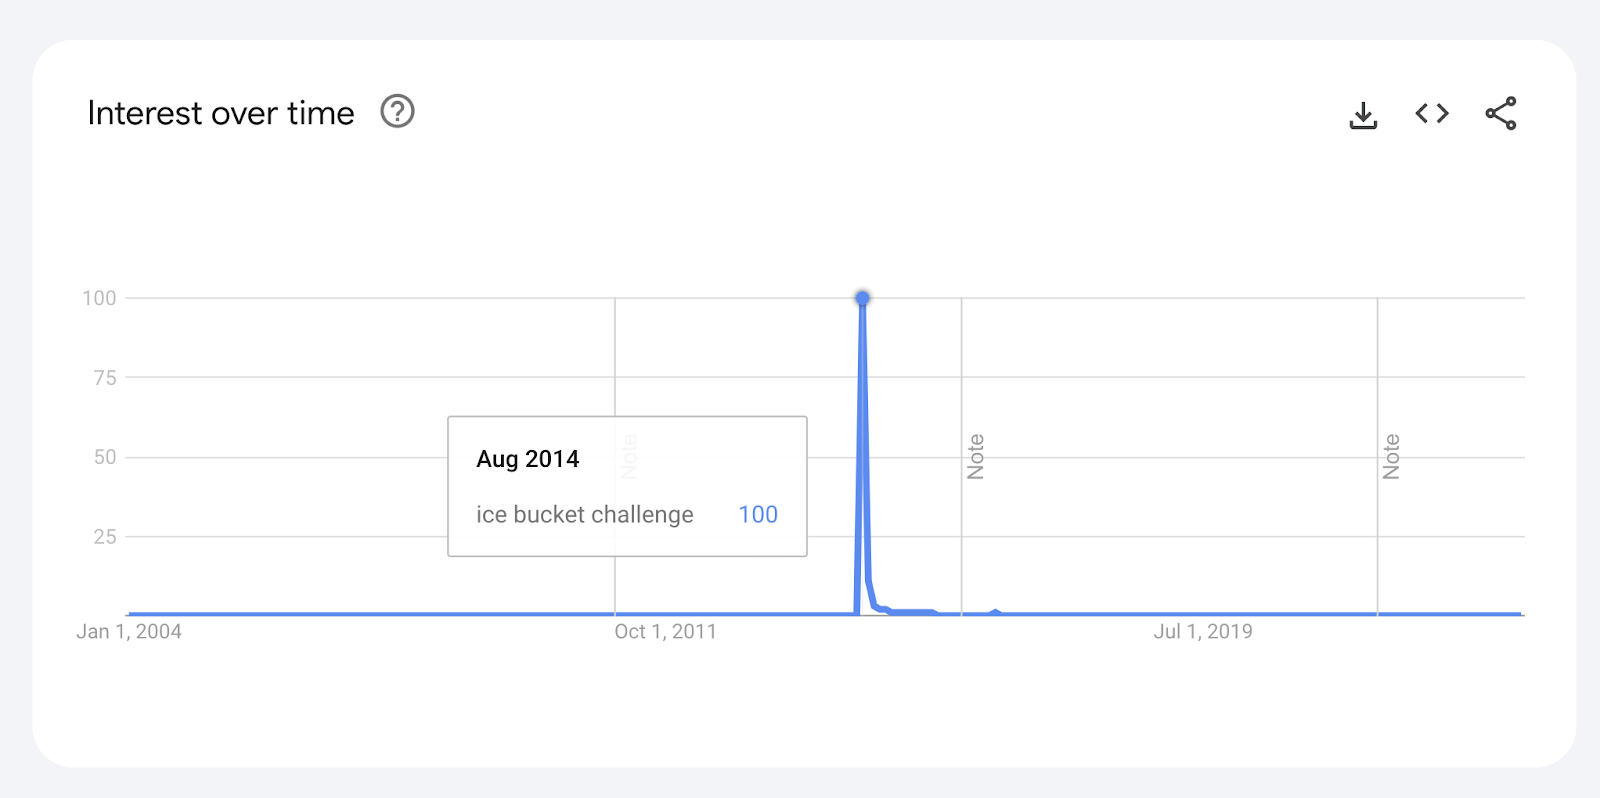 Google Trends "interest implicit    time" graph for "ice bucket challenge" shows a spike successful  August 2014